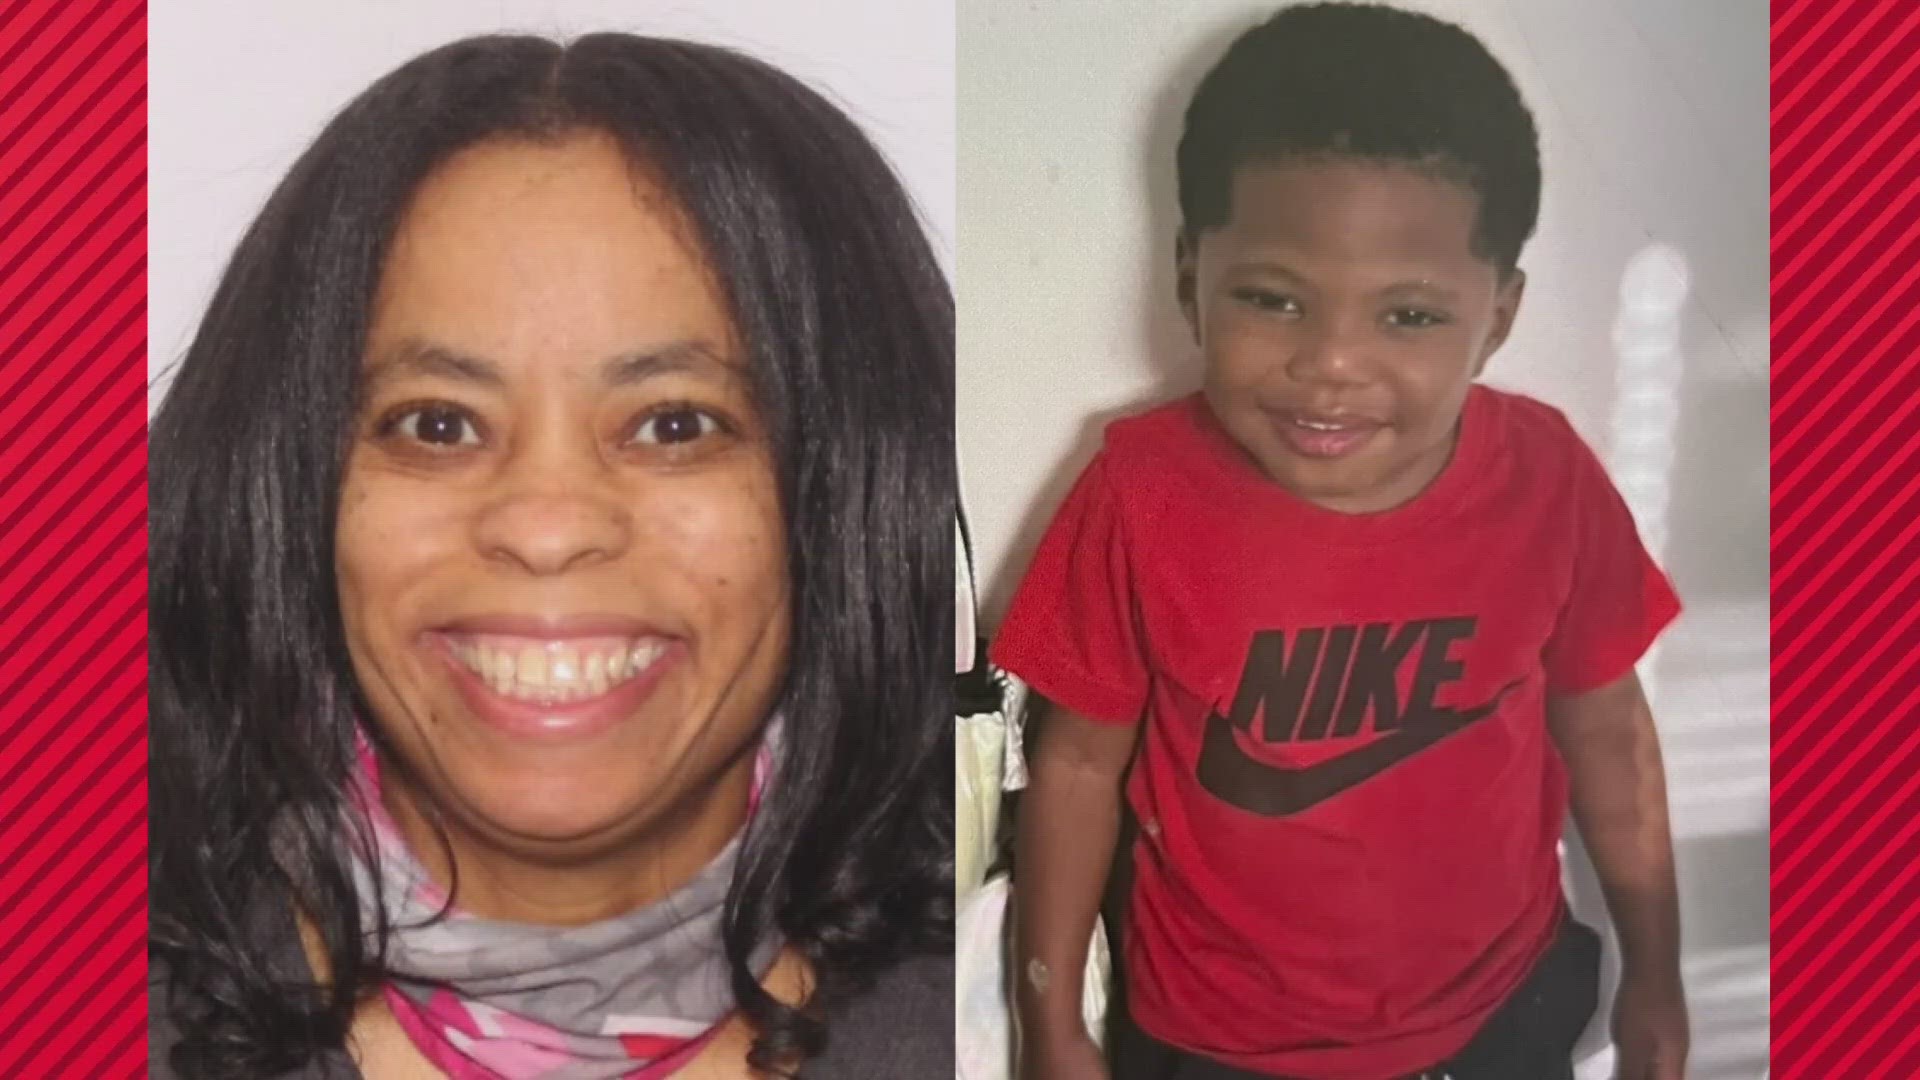 Authorities say the boy, identified as Darnell Taylor, was taken from the 900 block of Reeb Avenue around 3 a.m.